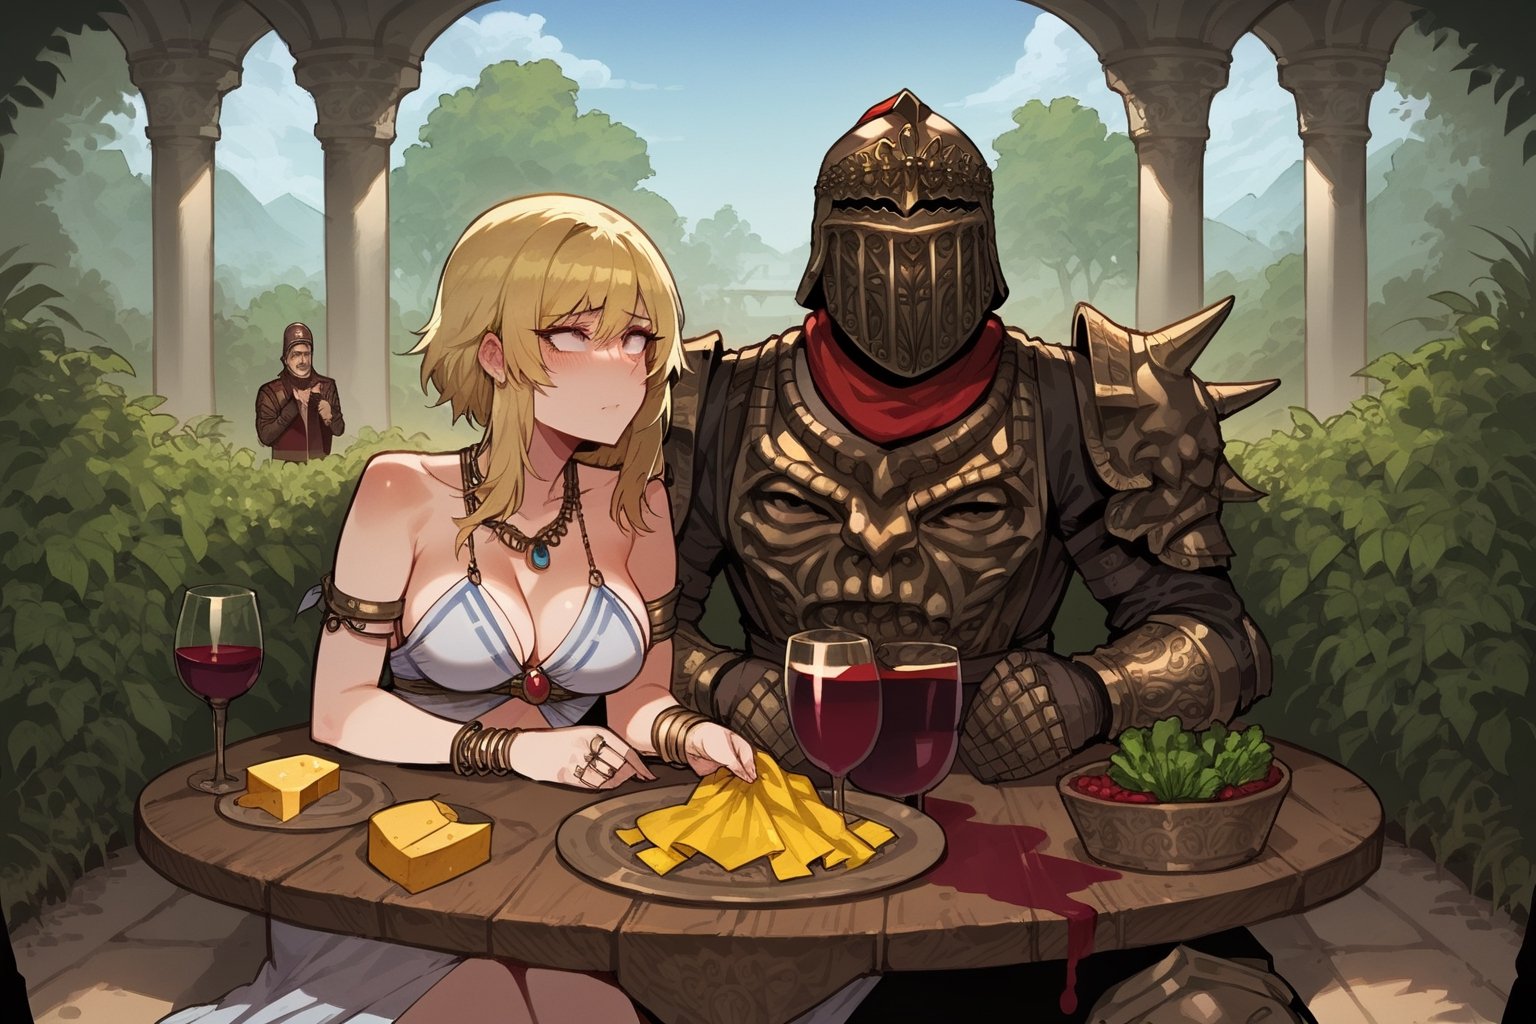 score_9, score_8, score_7, score_8_up, 1boy\(human, tall, wearing full madness armor and helmet\) with 1girl\(young, medium breasts, Lumine wearing full harem dress, jewellery, rings, amulet, bracelet, thicc thighs, wide hips, shy face, pouty lips, seductive\) and Paimon, (cheese, wine, cabbage on the table), both sitting on the floor, at the garden, both staring at each other